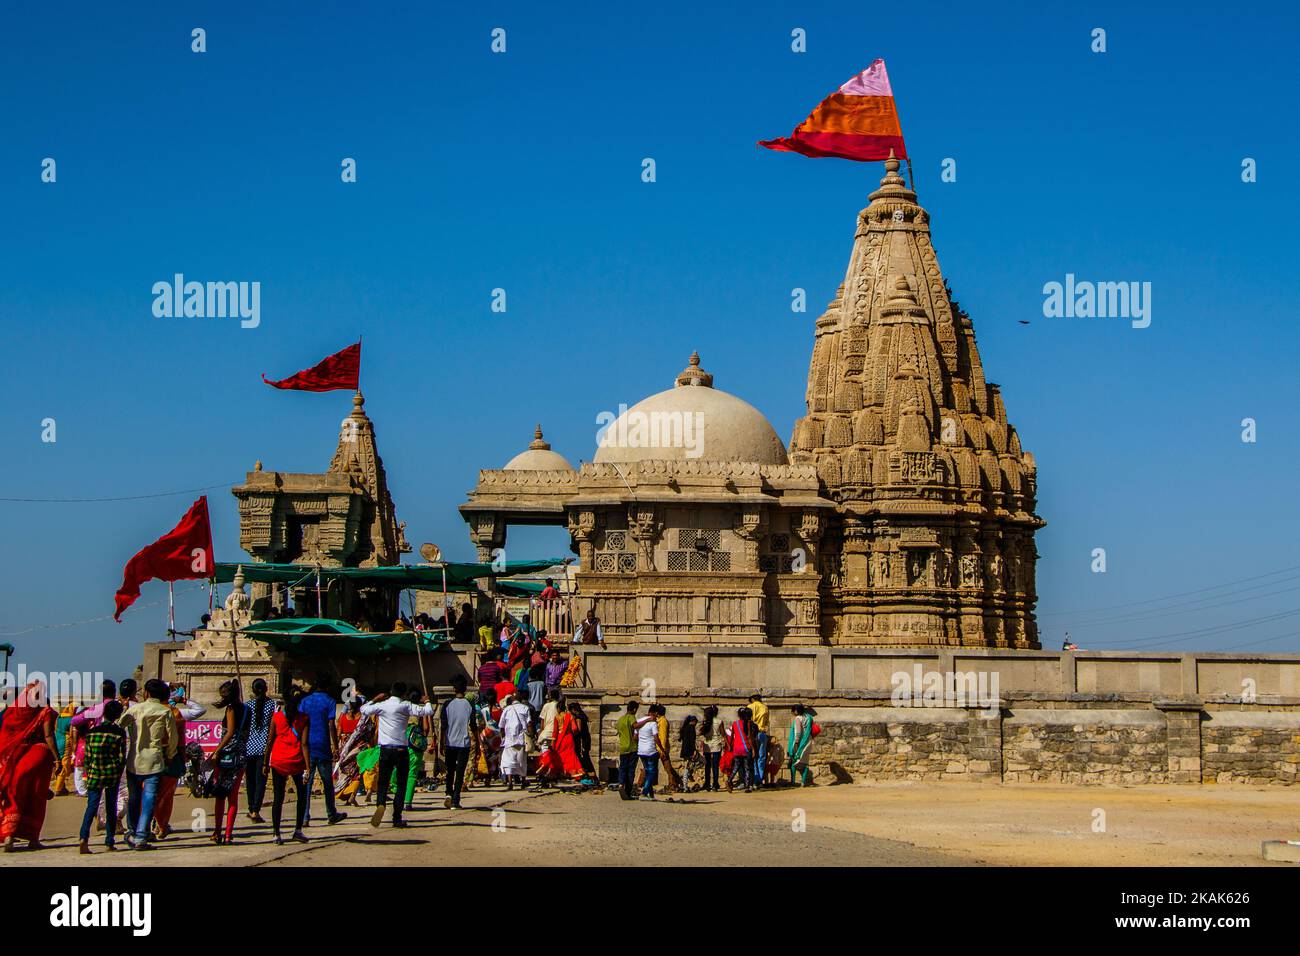 The Rukmini Devi Temple is a temple in Dwarka, 2 kilometres (1.2 mi) away from Dwarka,Gujrat India on 06 Jan,2017. It is dedicated to Rukmini, KrishnaÂ’s chief queen. The temple is said to be 2,500 years old but in its present form it is inferred to belong to the 12th century.(Photo By Vishal Bhatnagar/NurPhoto) (Photo by Vishal Bhatnagar/NurPhoto) *** Please Use Credit from Credit Field *** Stock Photo